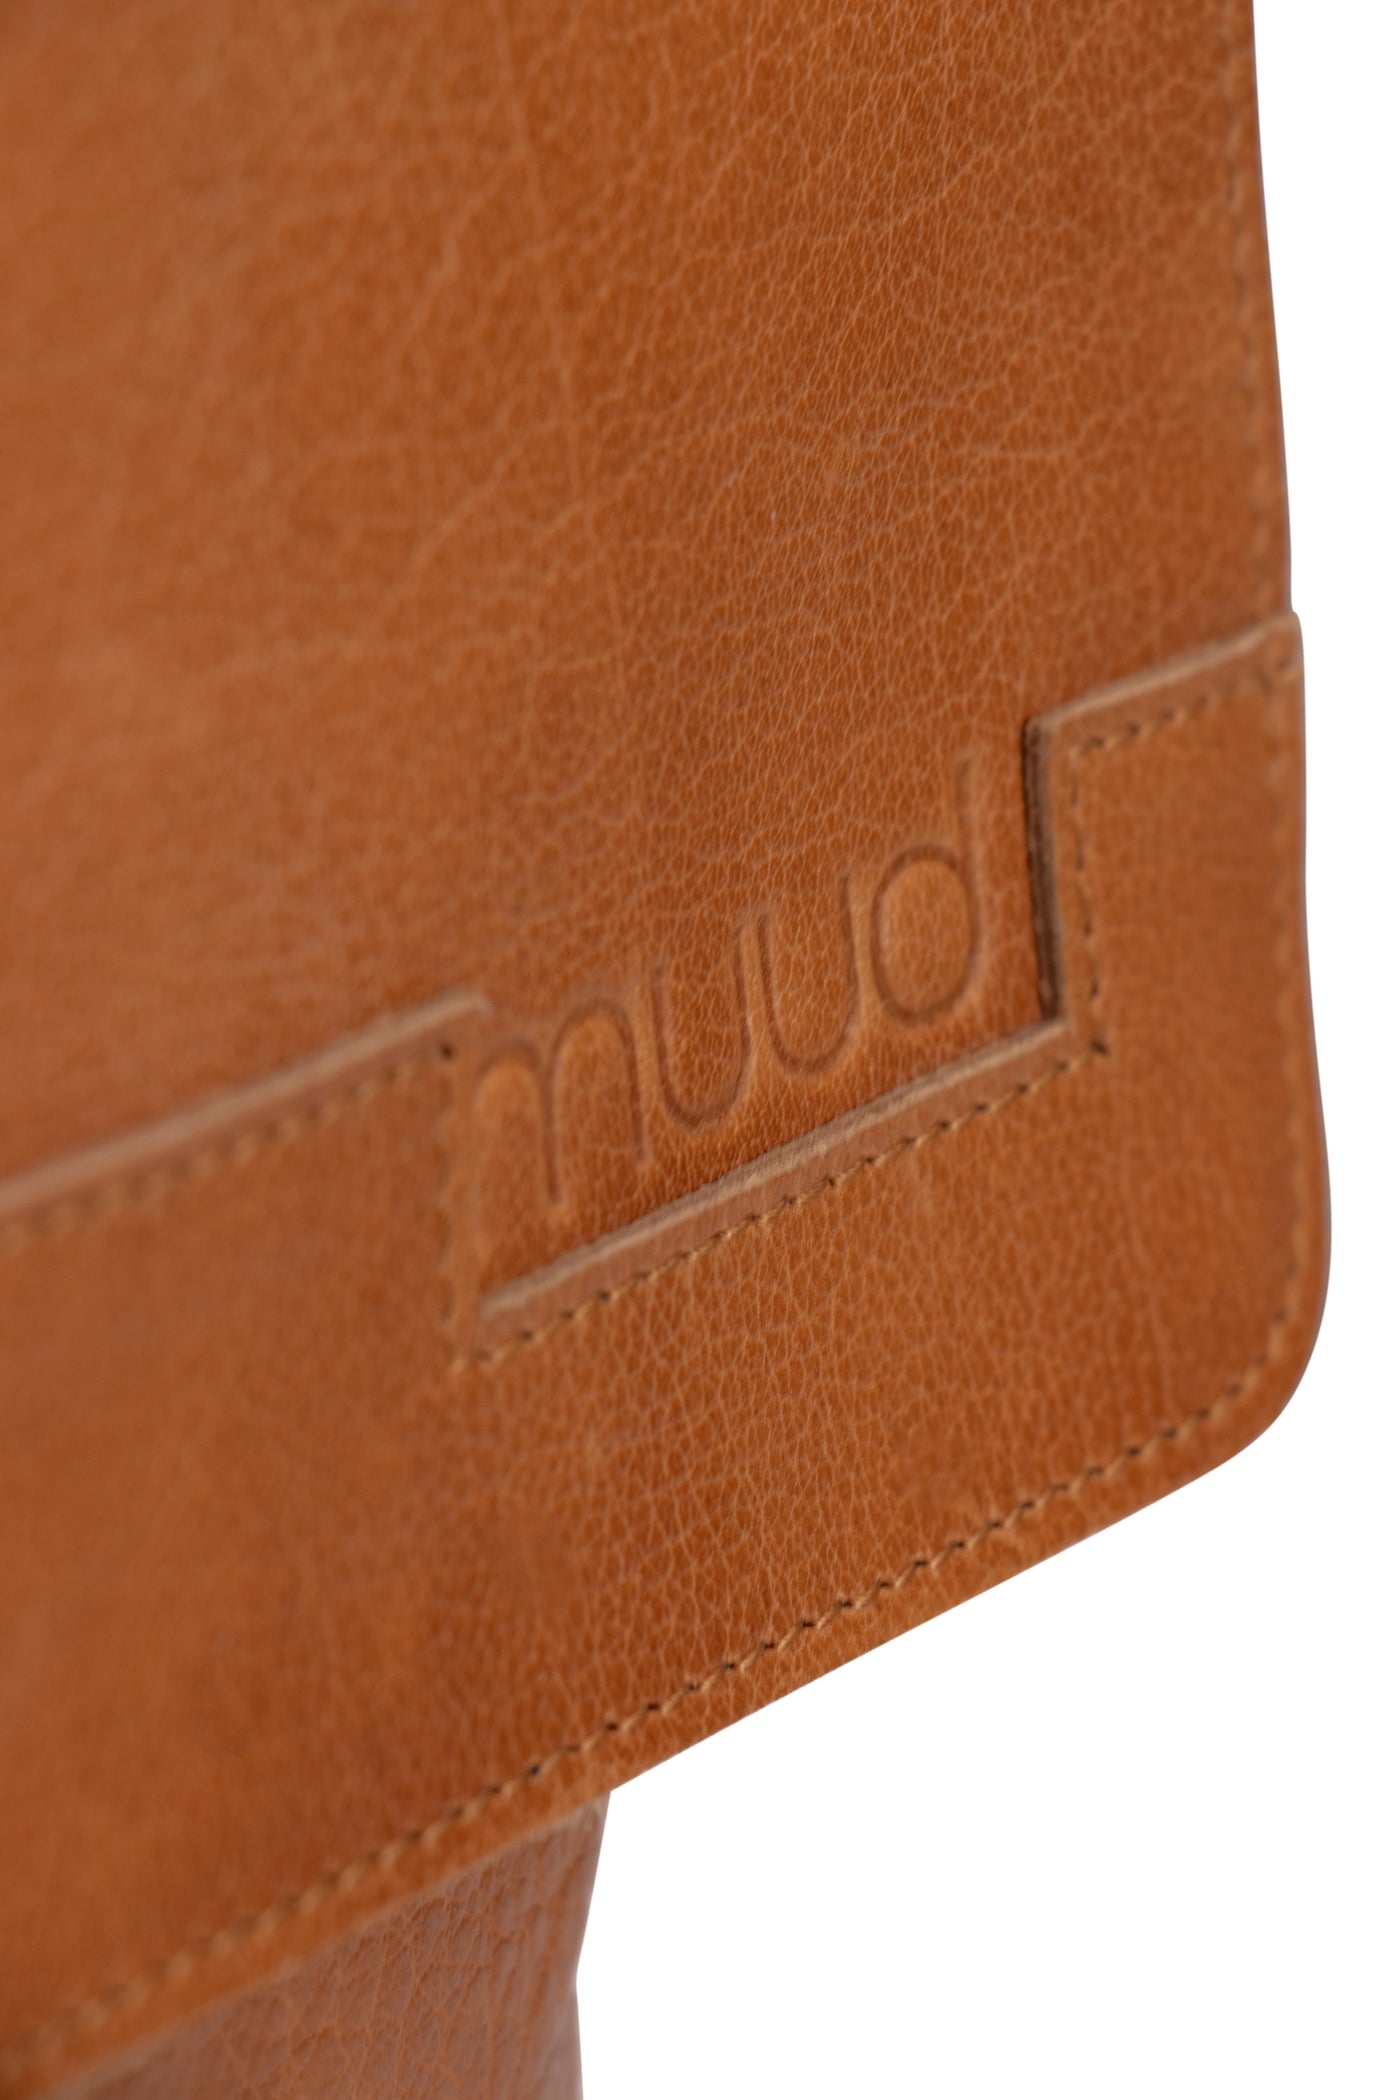 muud Arendal Project Bag Living Whisky